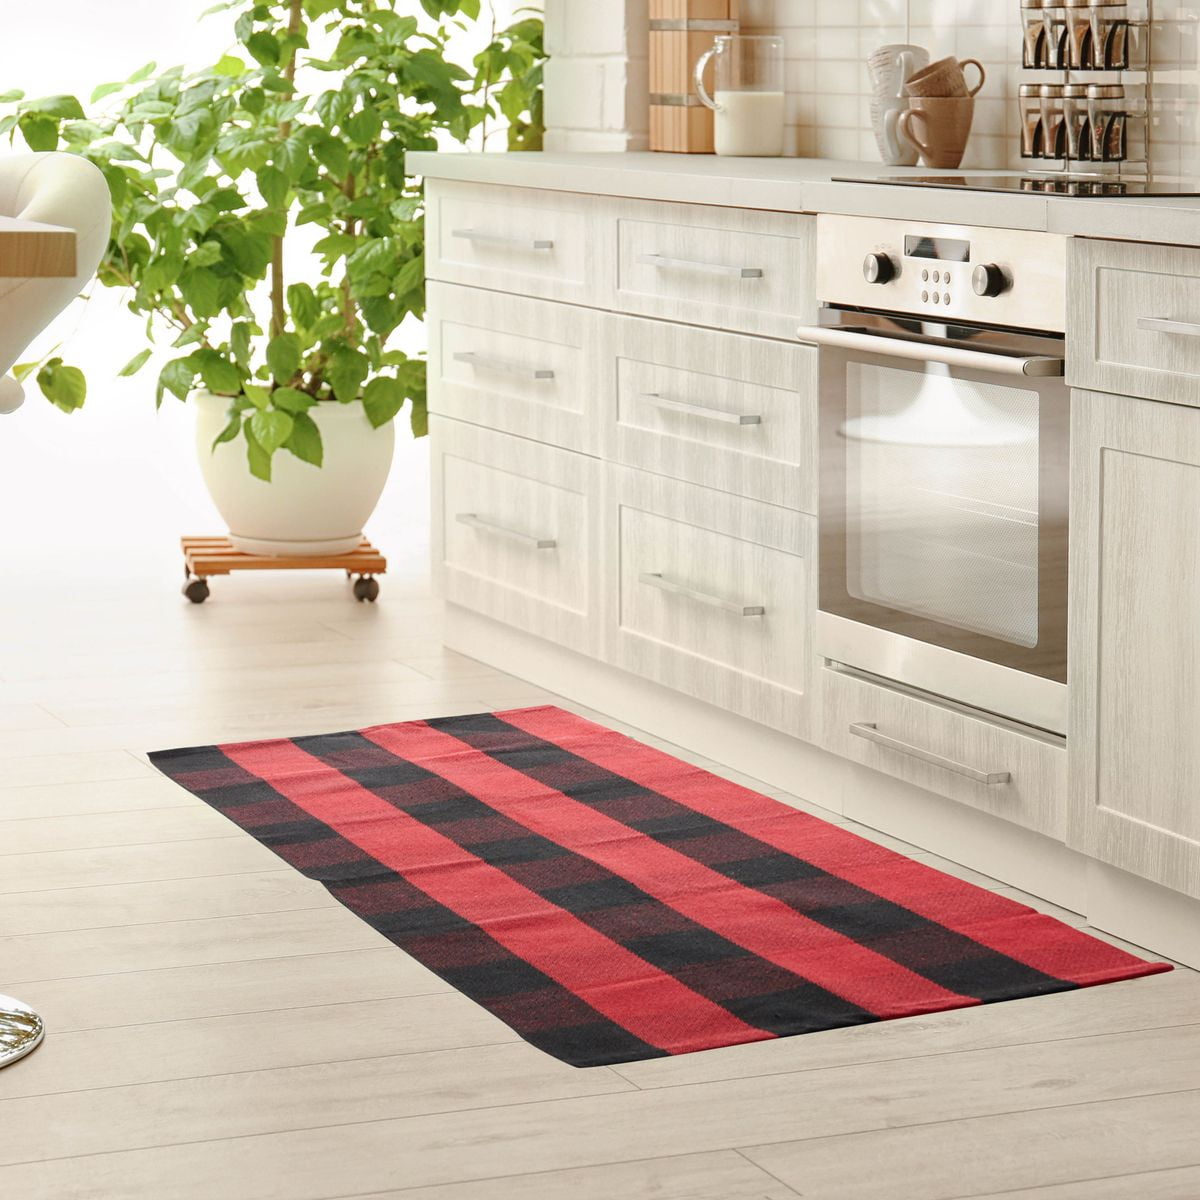 Black And Red Buffalo Plaid Rug 2x4, Red And Black Buffalo Check Kitchen Rug